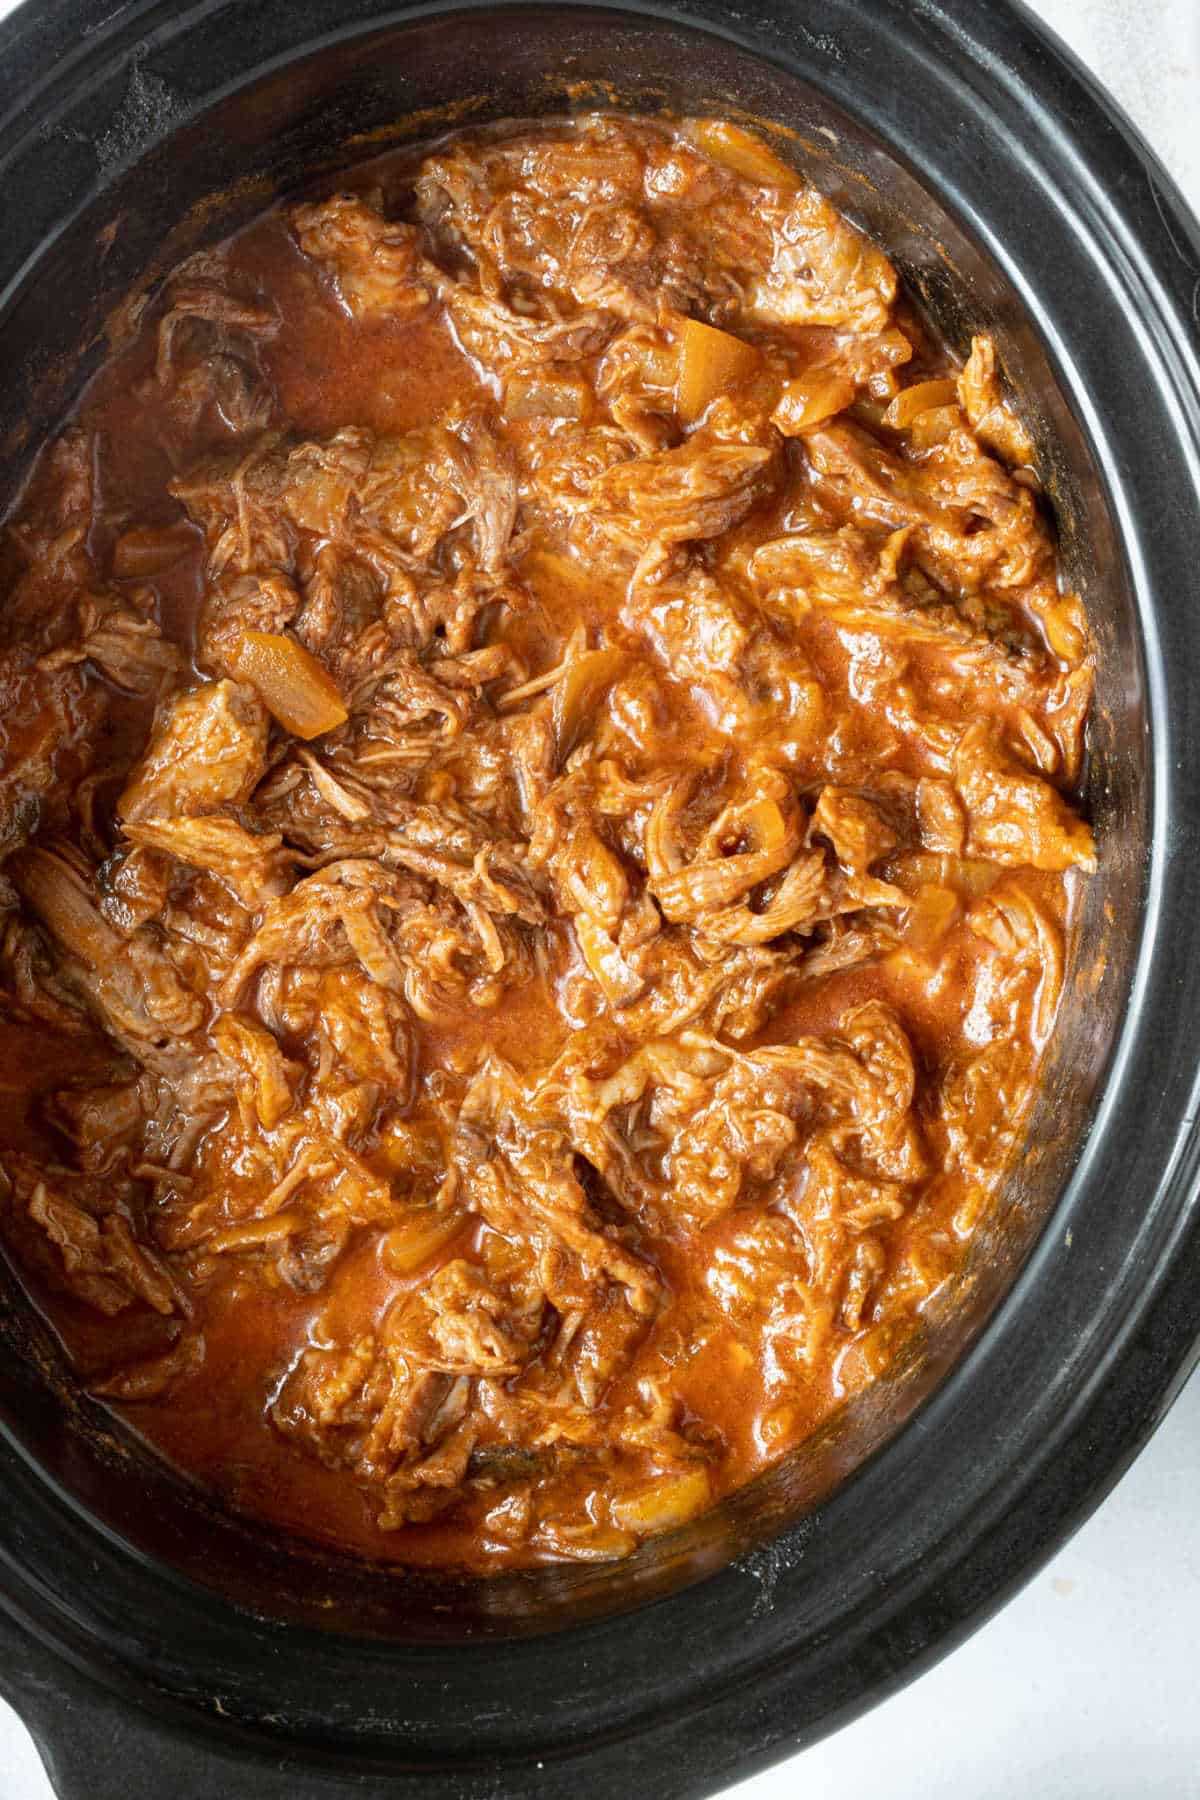 Pulled bbq beef brisket in slow cooker.